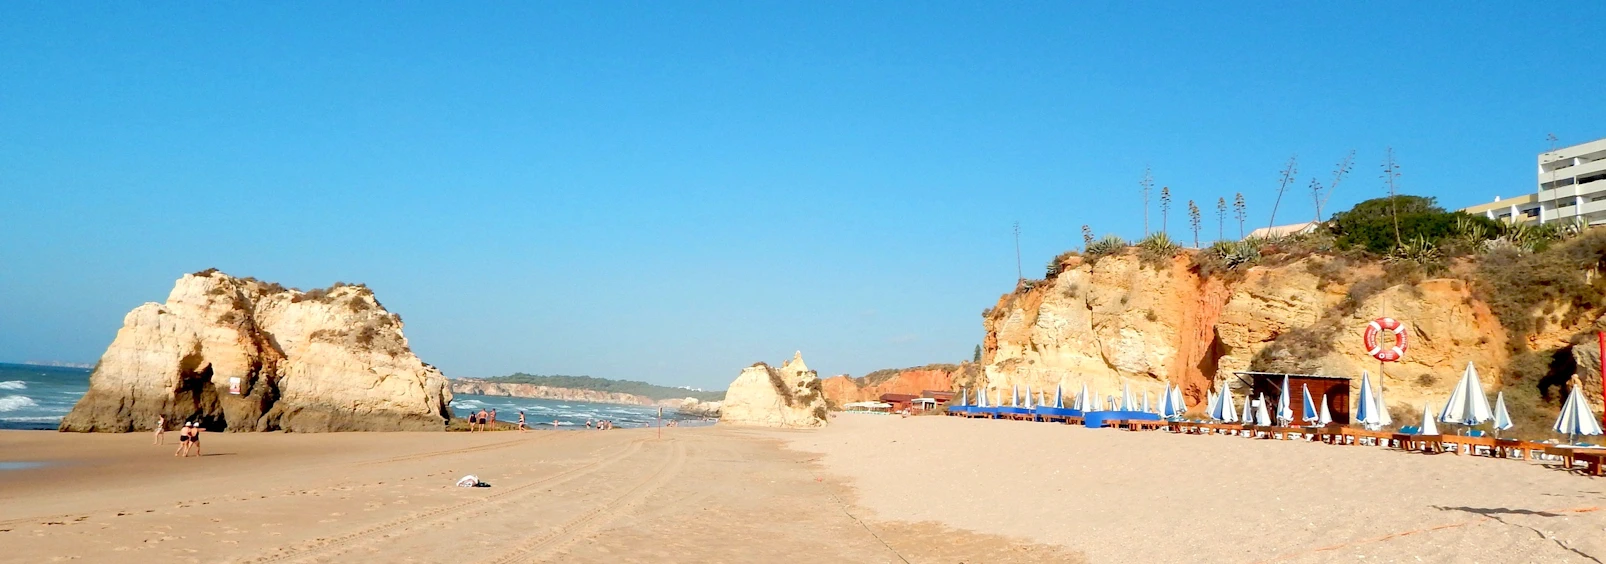 A Visit to the Algarve